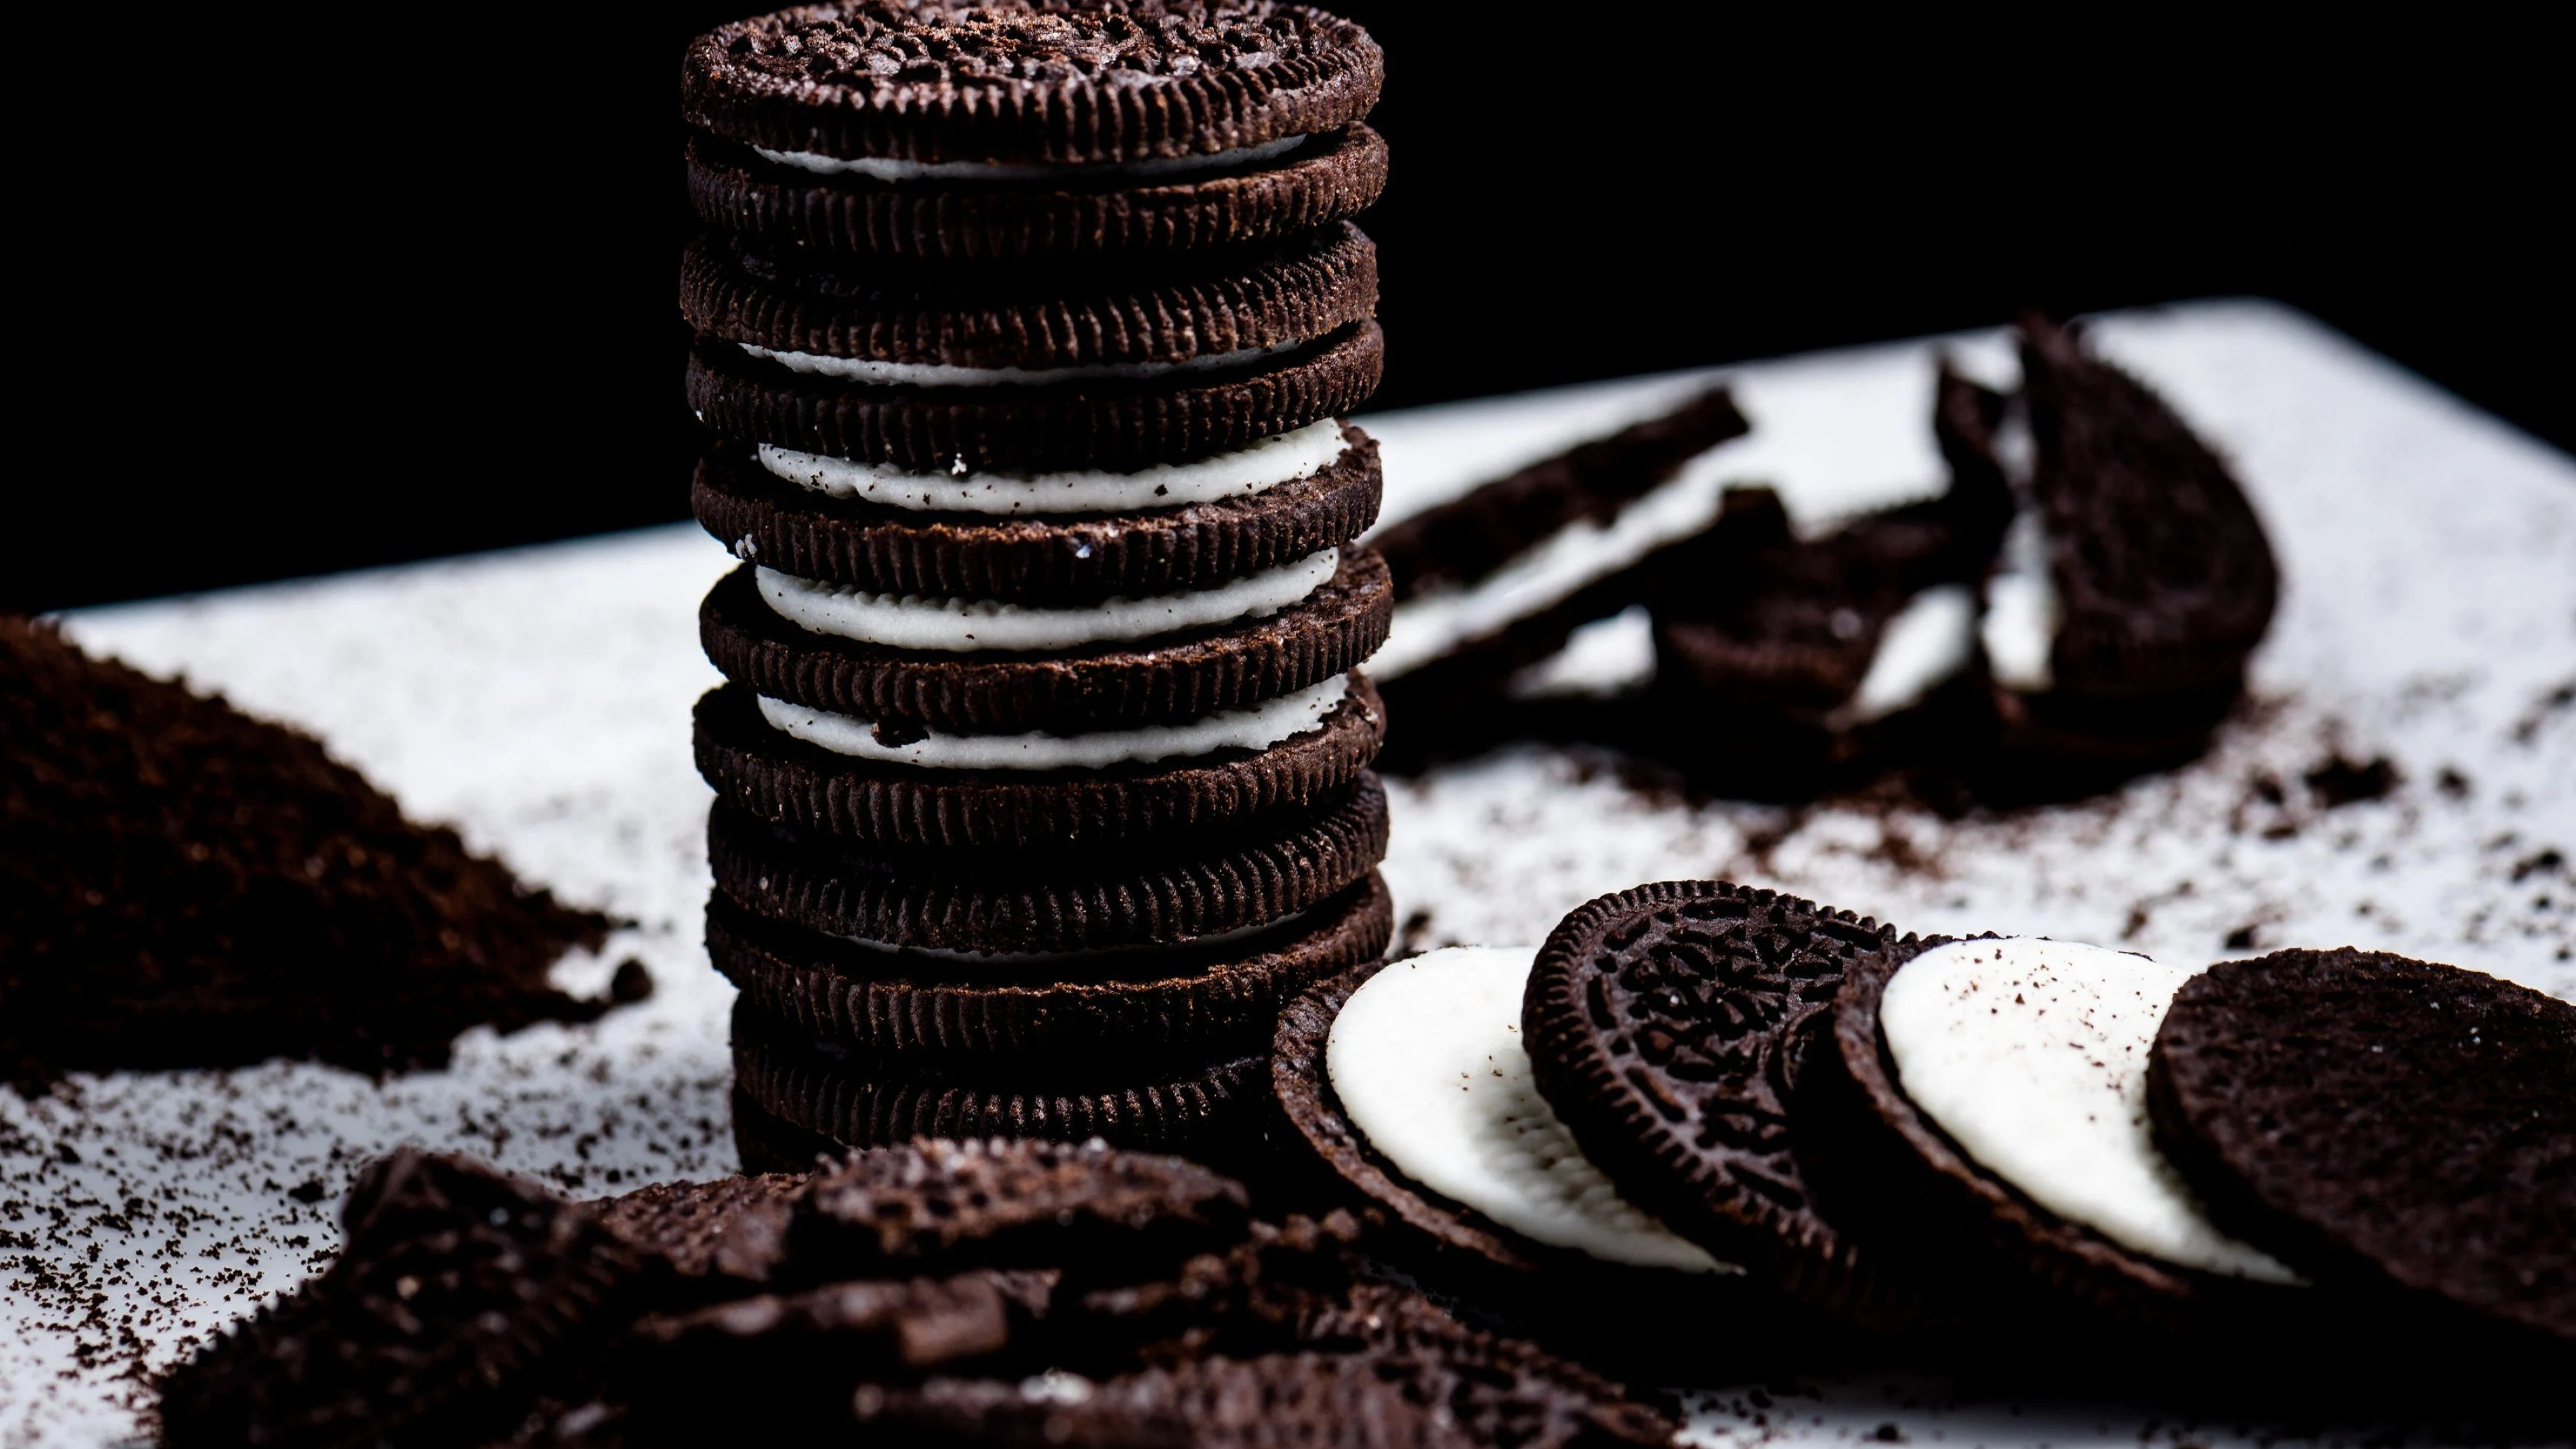 Oreo Cookies: A brand of sandwich cookie, Baked goods. 3840x2160 4K Wallpaper.